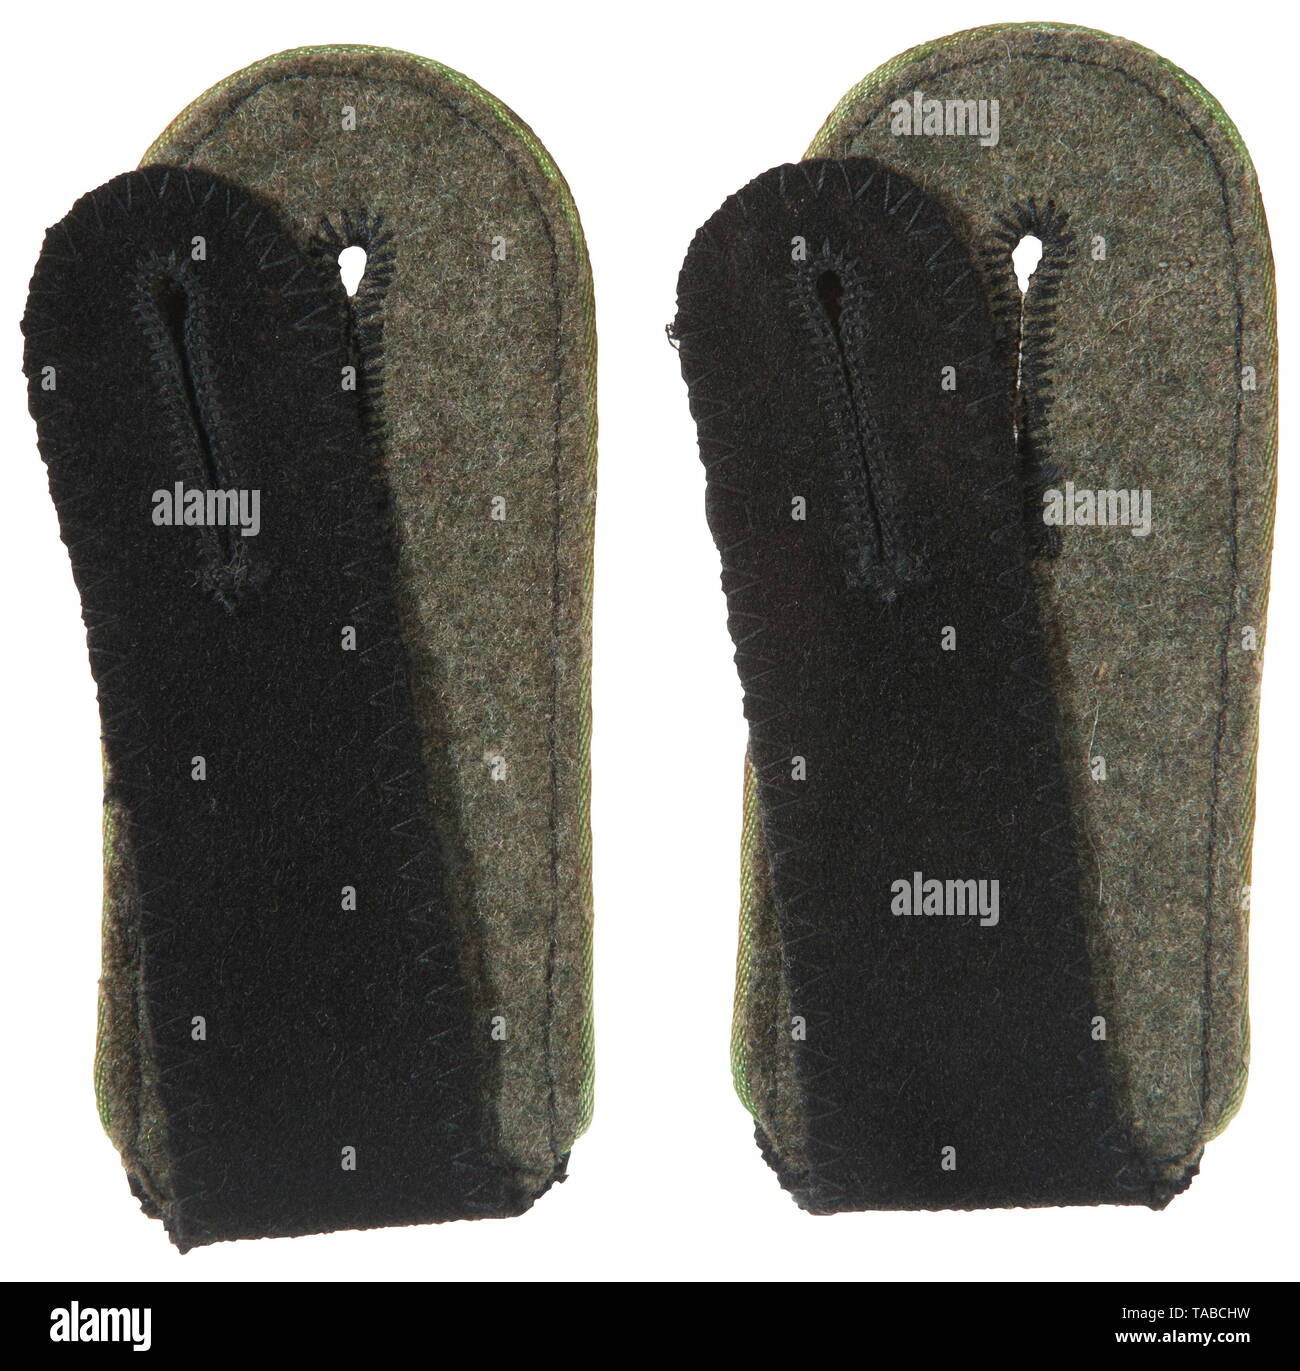 A pair of SS EM Jäger shoulder boards Slip-on type. Black wool with lime-green piping and field-grey wool underlay. USA-lot, see page 4. historic, historical, 20th century, 1930s, 1940s, Waffen-SS, armed division of the SS, armed service, armed services, NS, National Socialism, Nazism, Third Reich, German Reich, Germany, military, militaria, utensil, piece of equipment, utensils, object, objects, stills, clipping, clippings, cut out, cut-out, cut-outs, fascism, fascistic, National Socialist, Nazi, Nazi period, Editorial-Use-Only Stock Photo